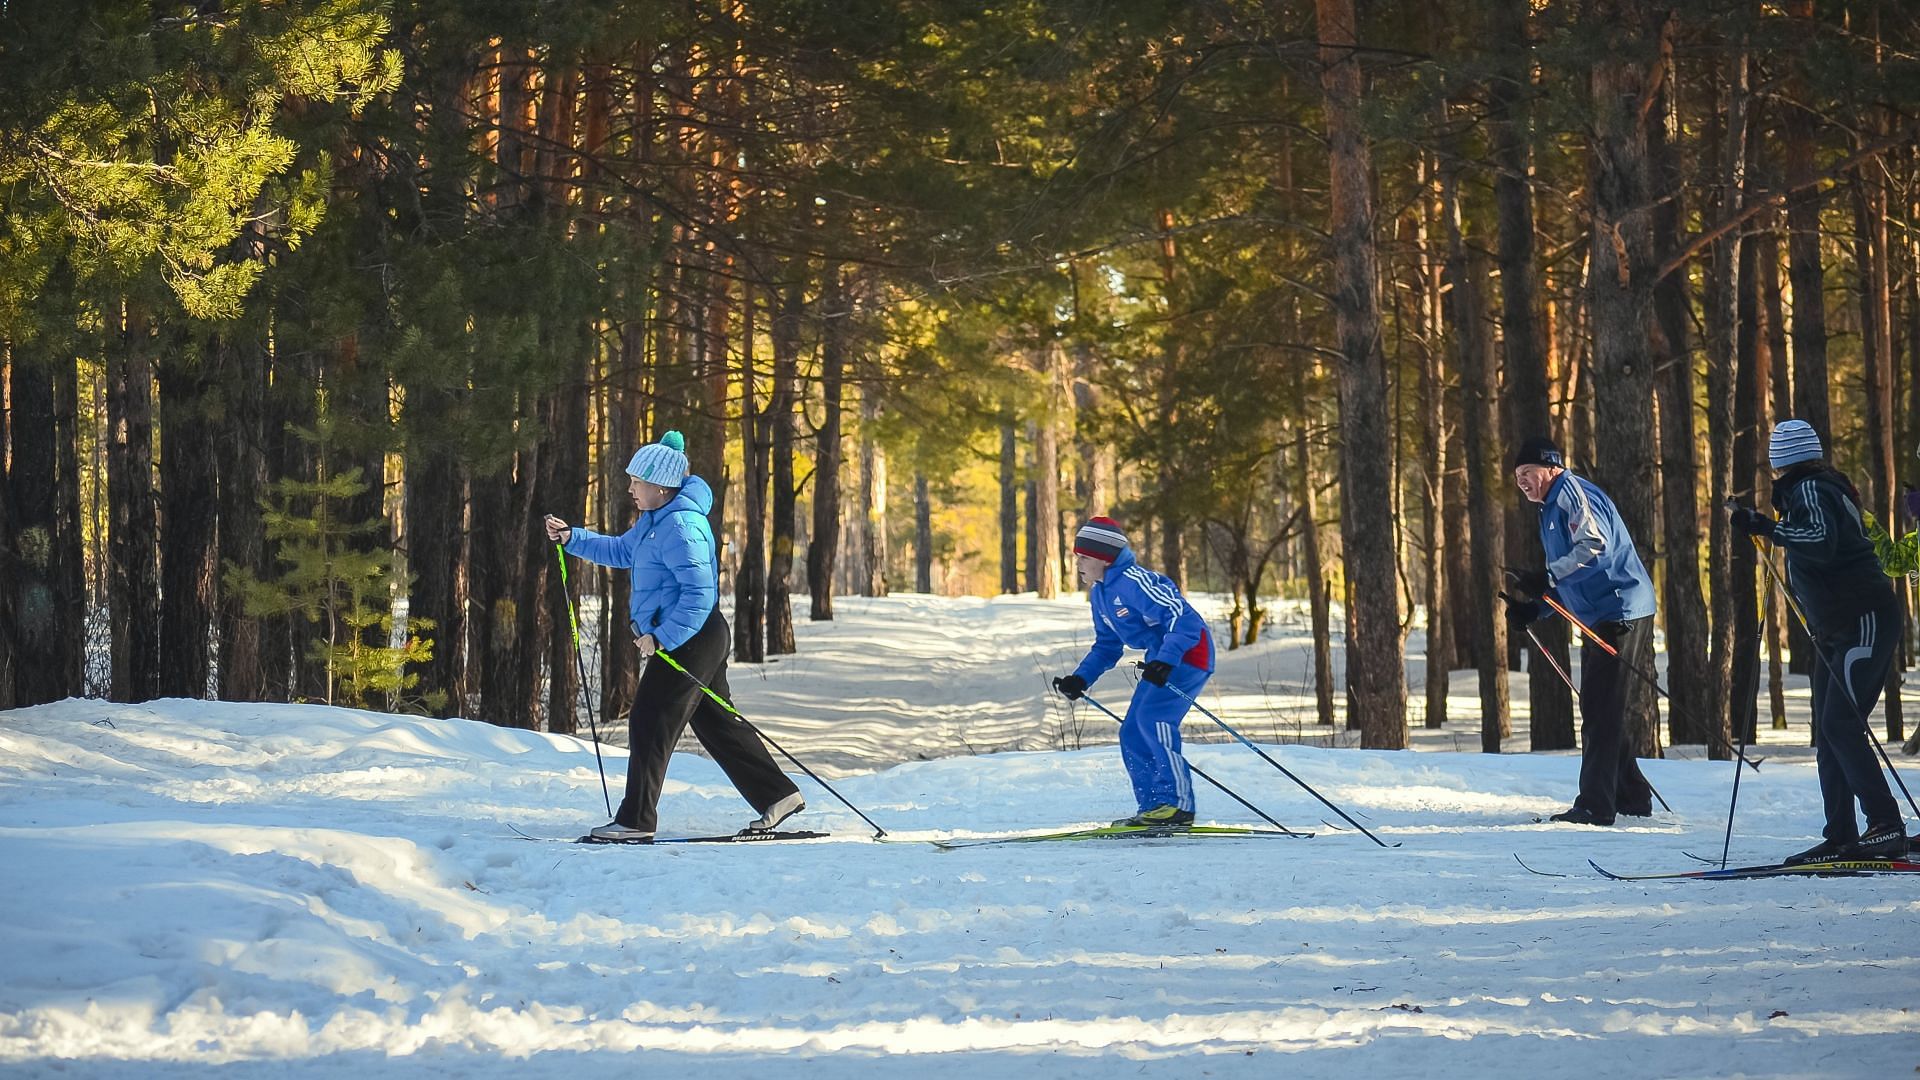 Every time you go skiing, your core gets a good workout. (Image via Pexels/ No Name)